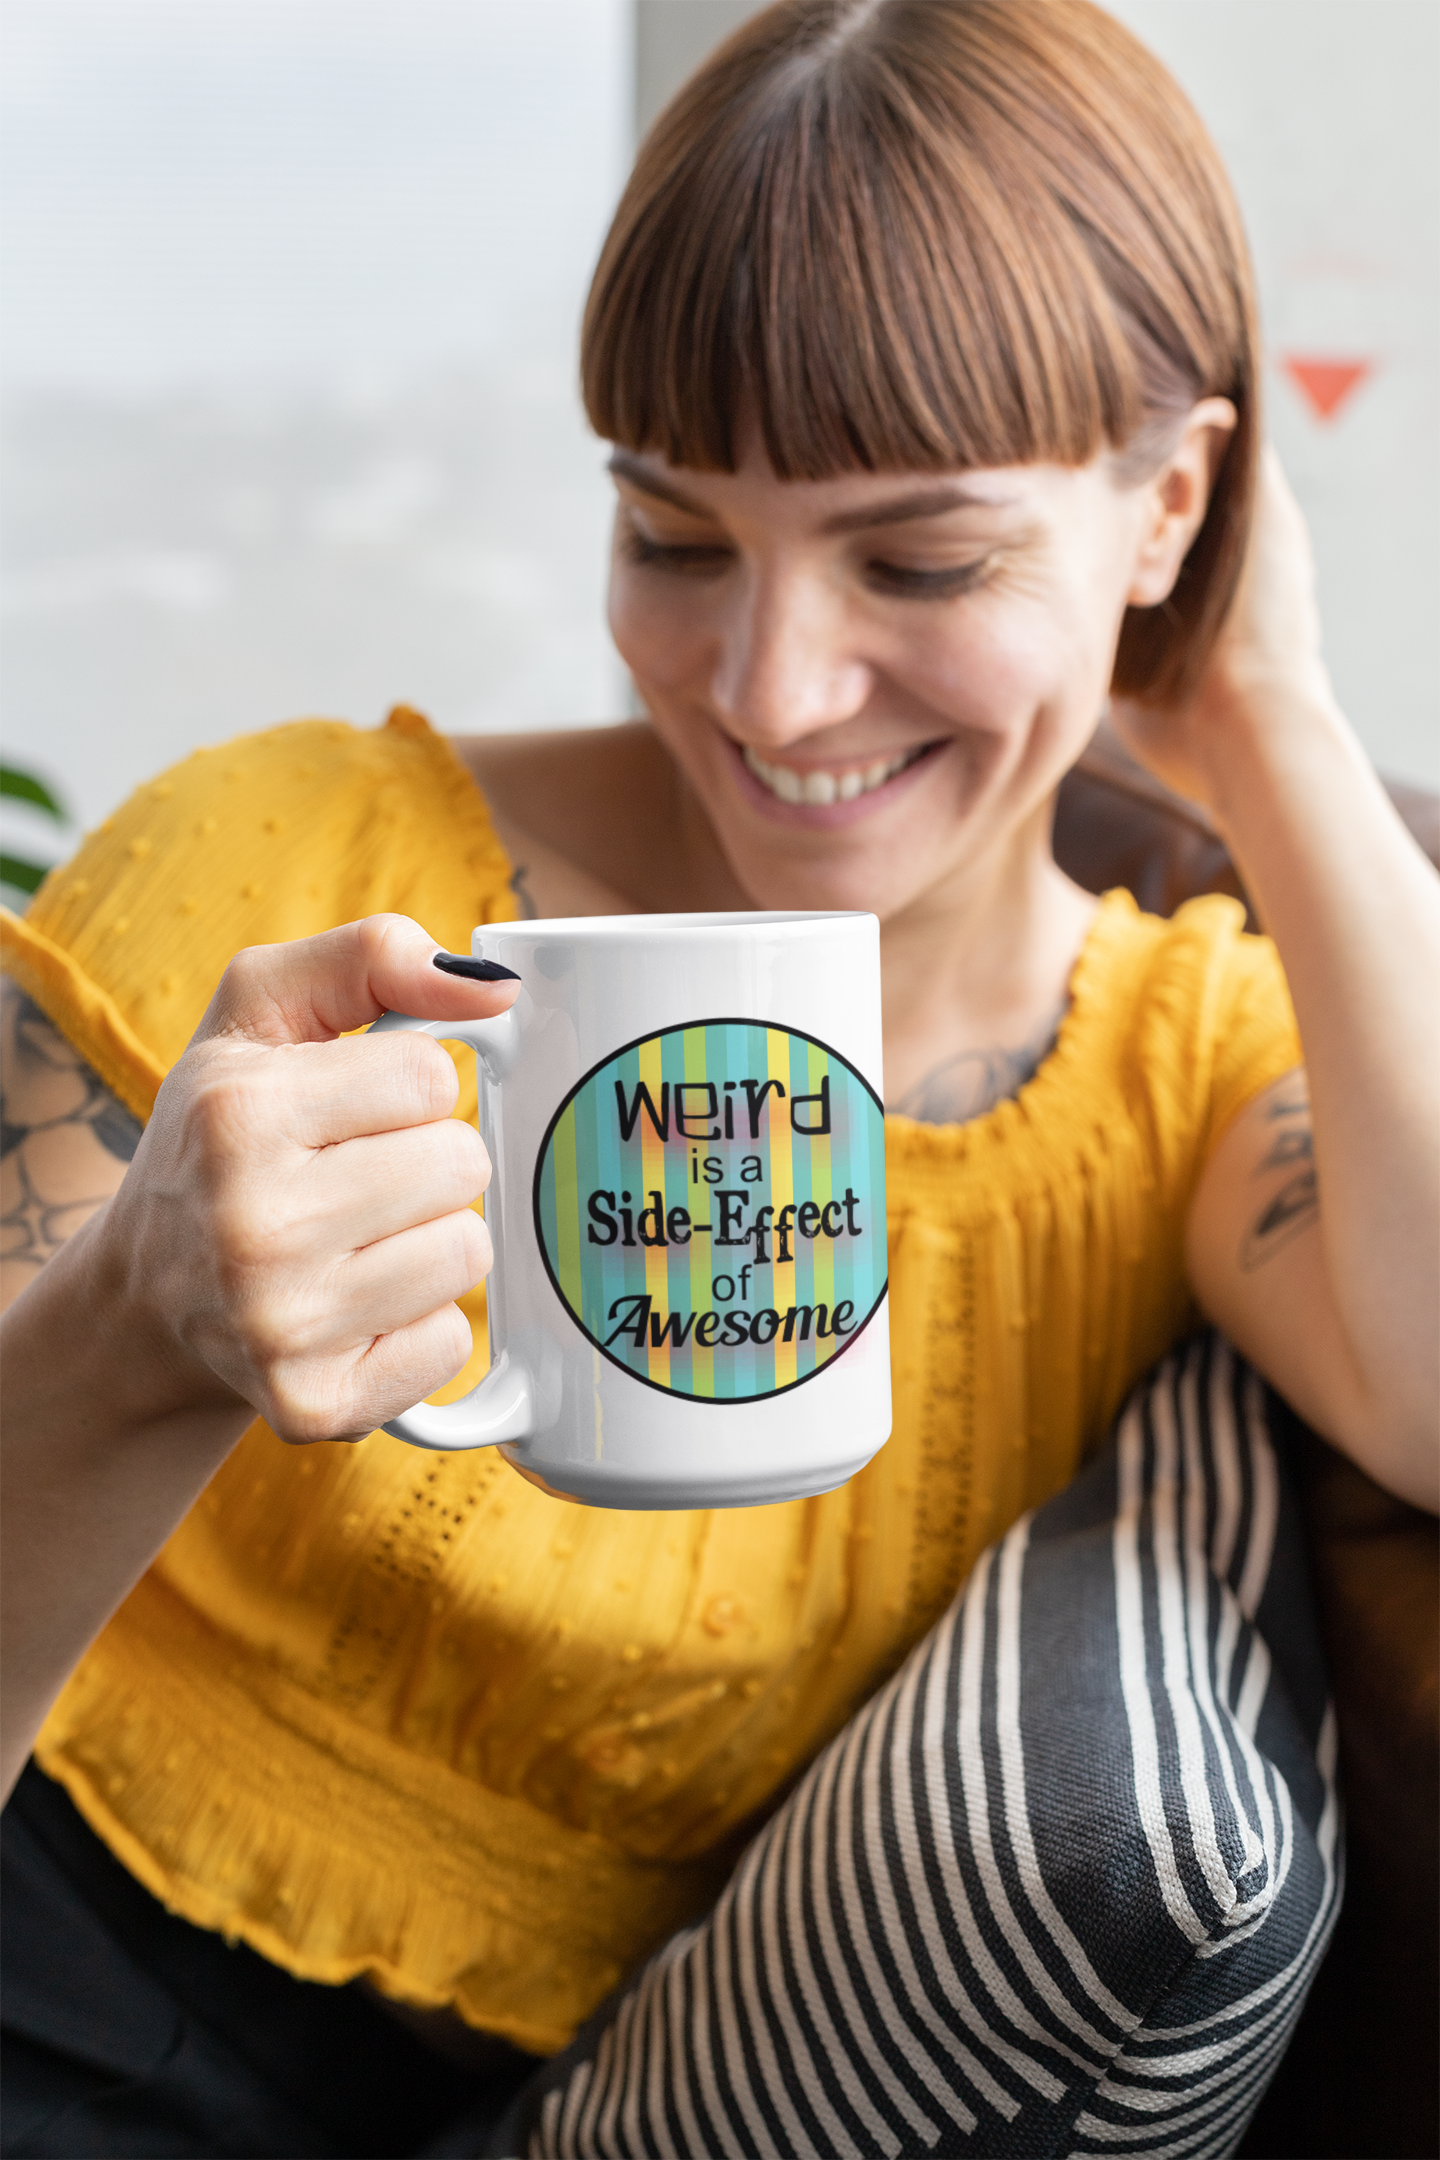 Weird is a Side-Effect of Awesome Mug